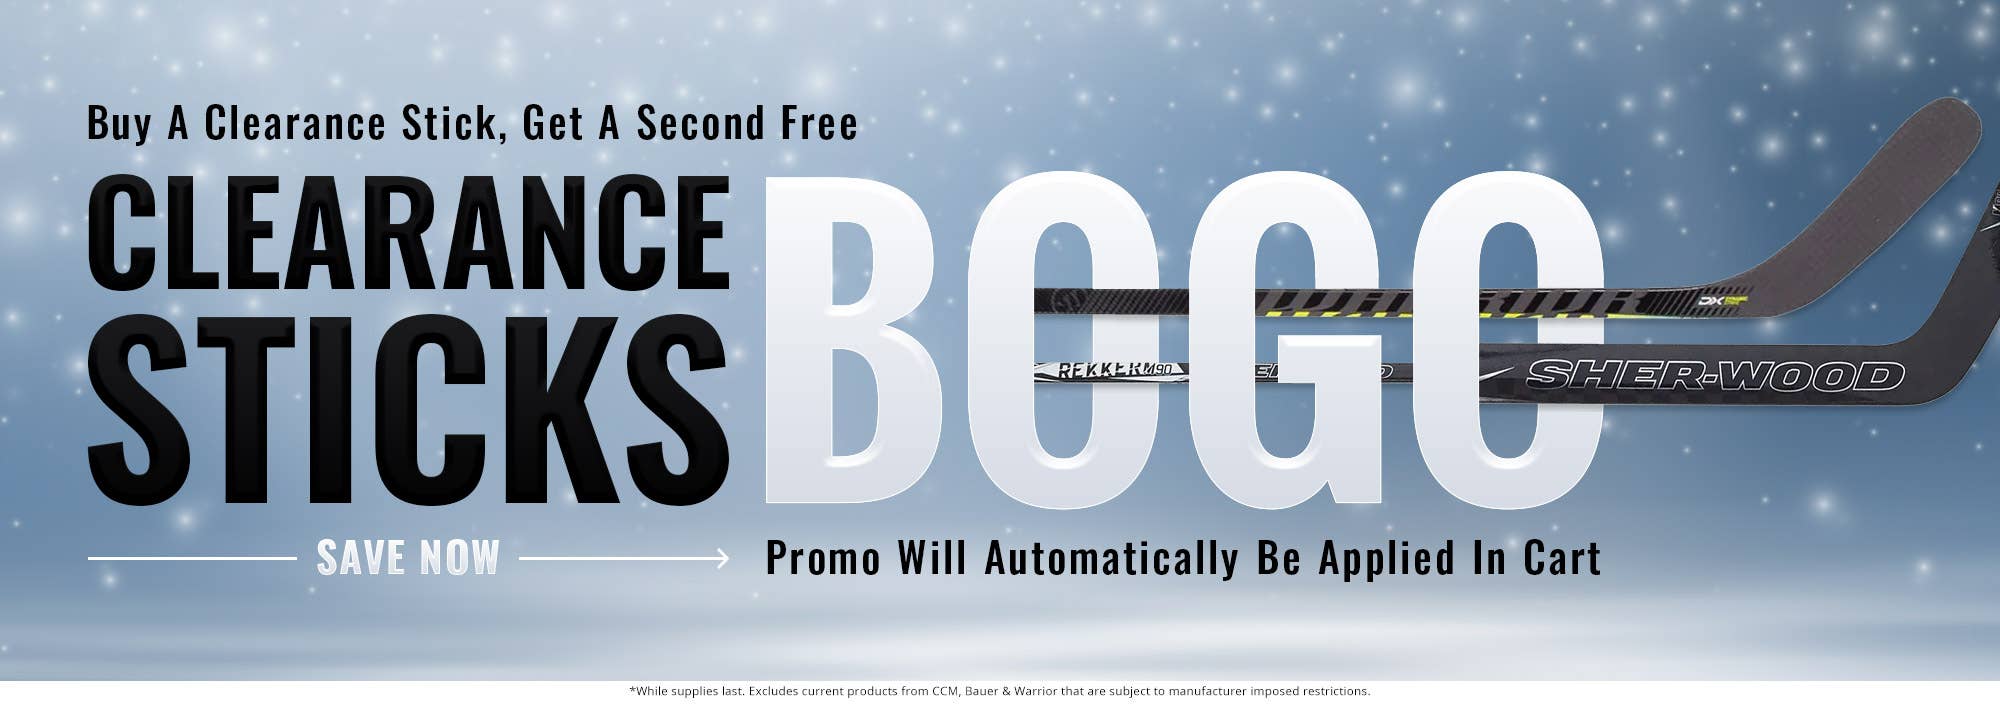 Cyber Monday: Buy One Clearance Stick, Get A Second Free